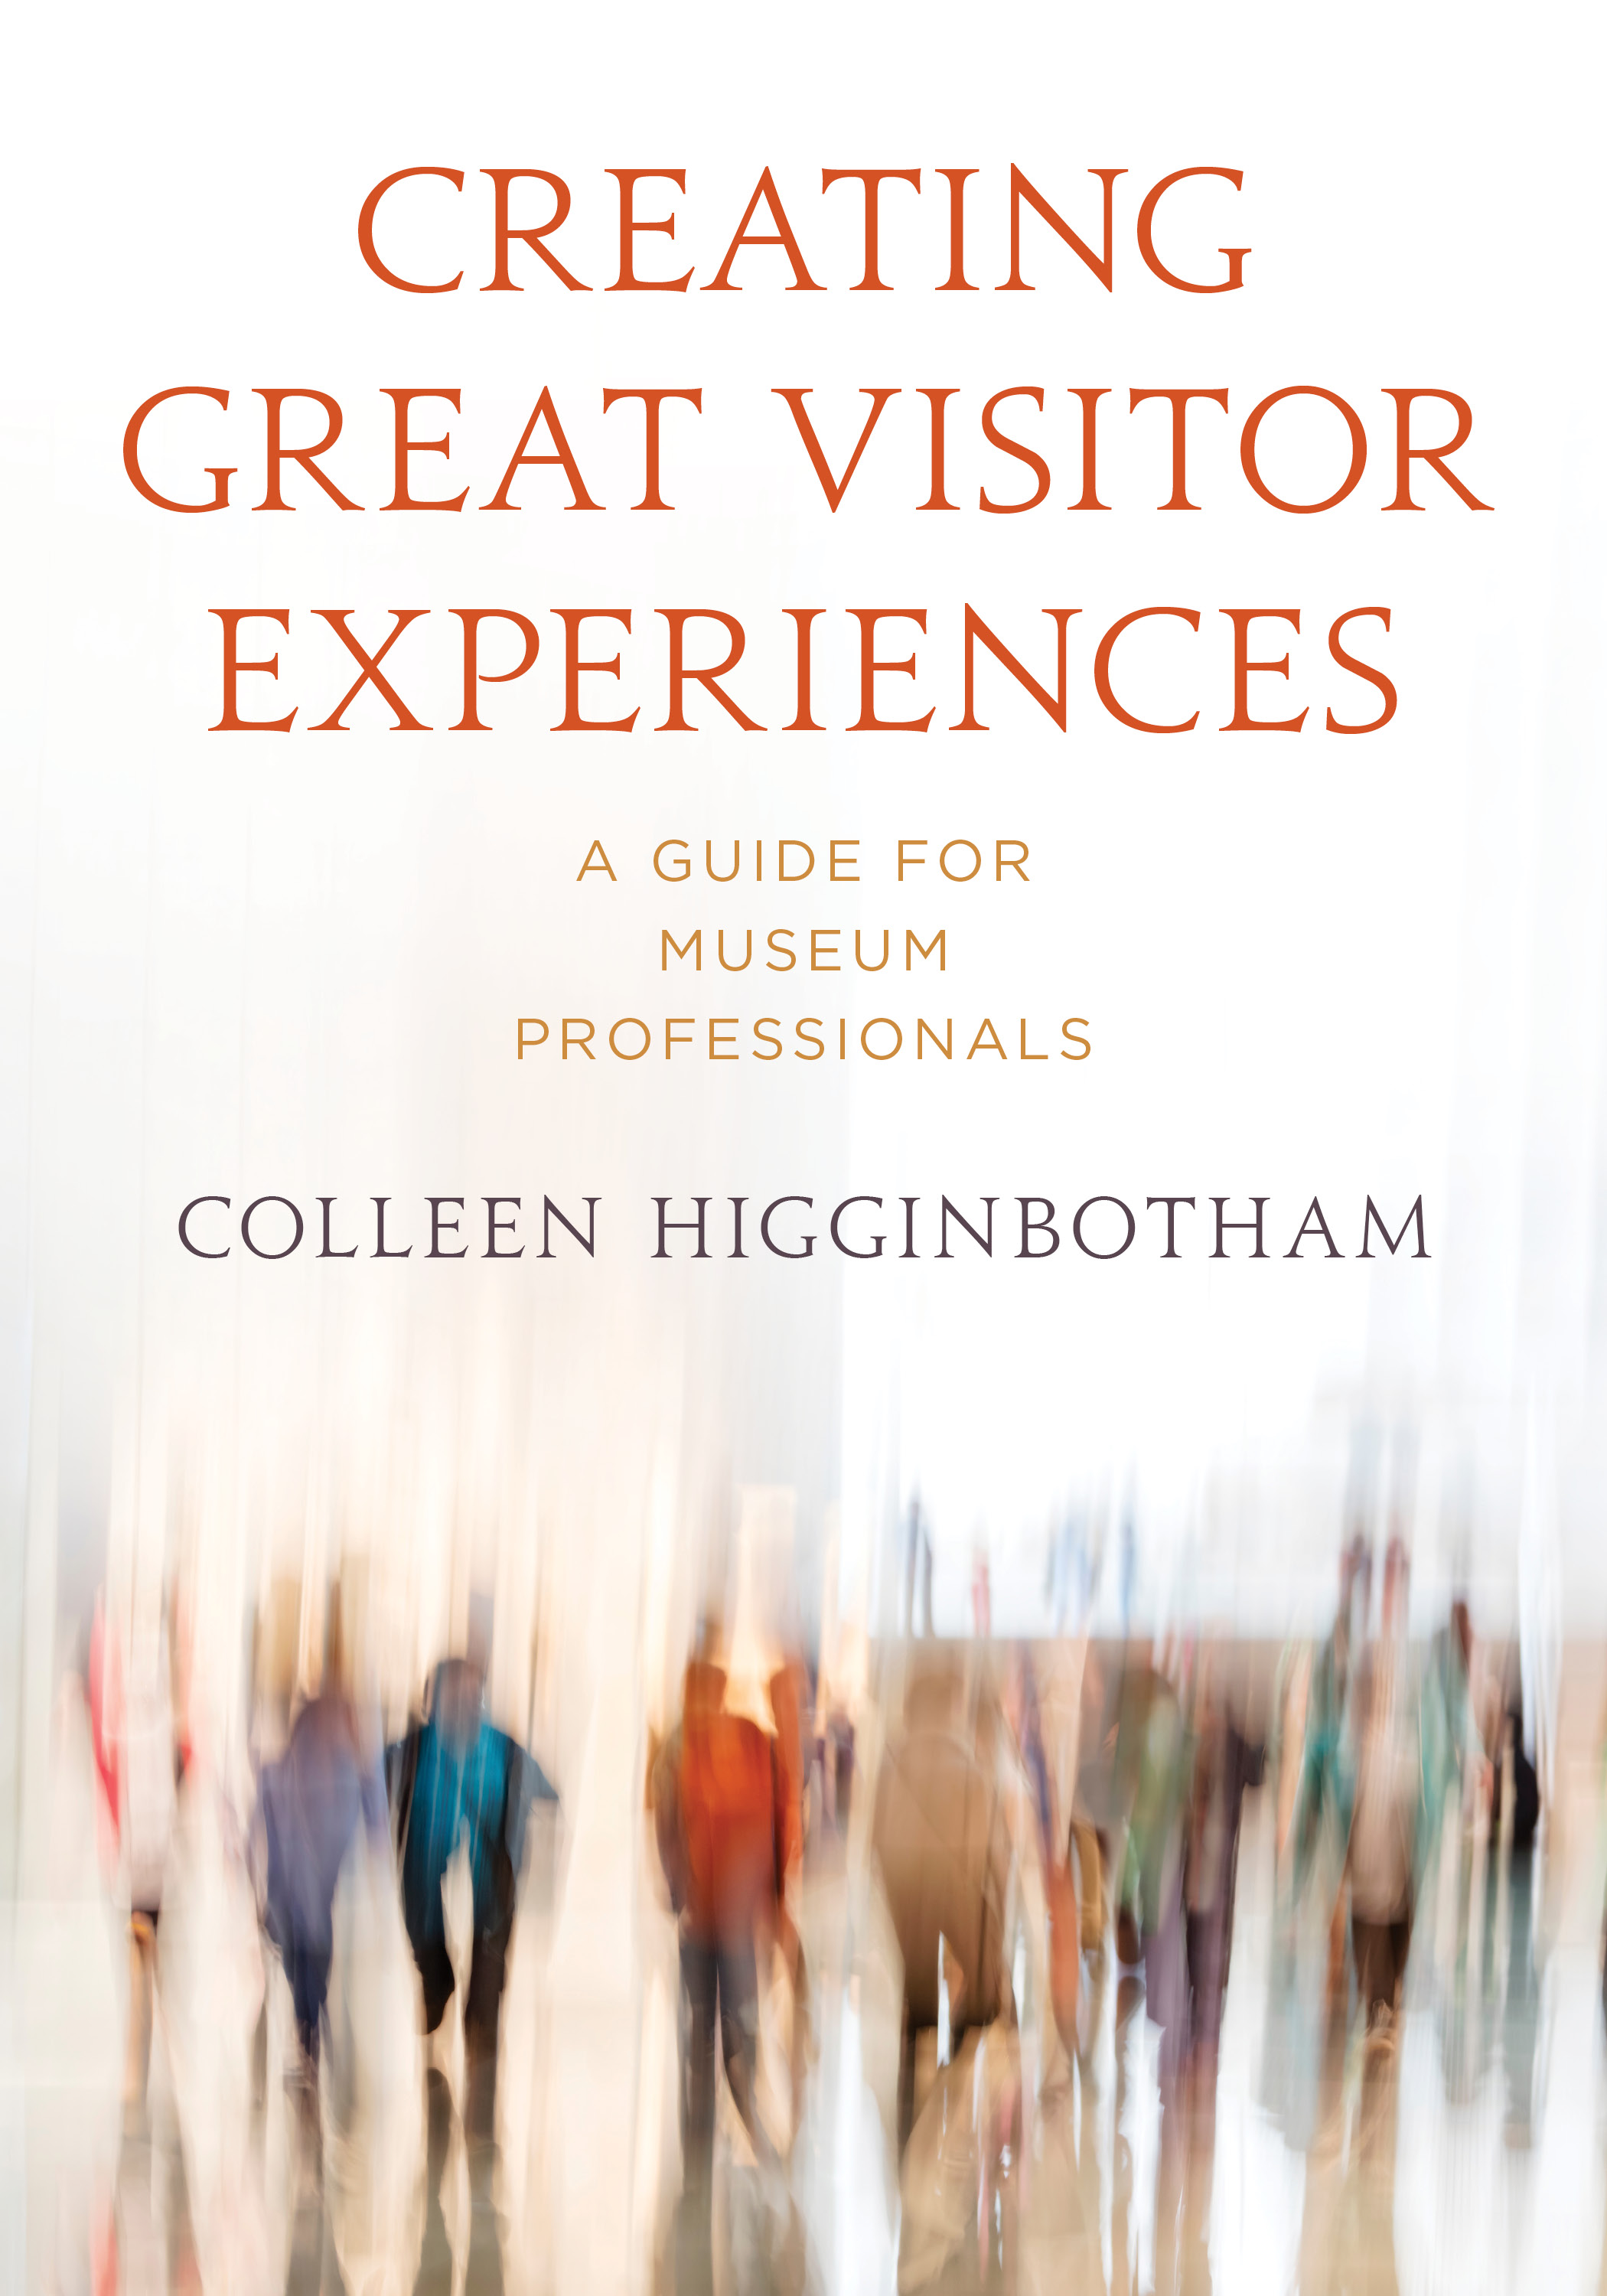 Creating Great Visitor Experiences: A Guide for Museum Professionals